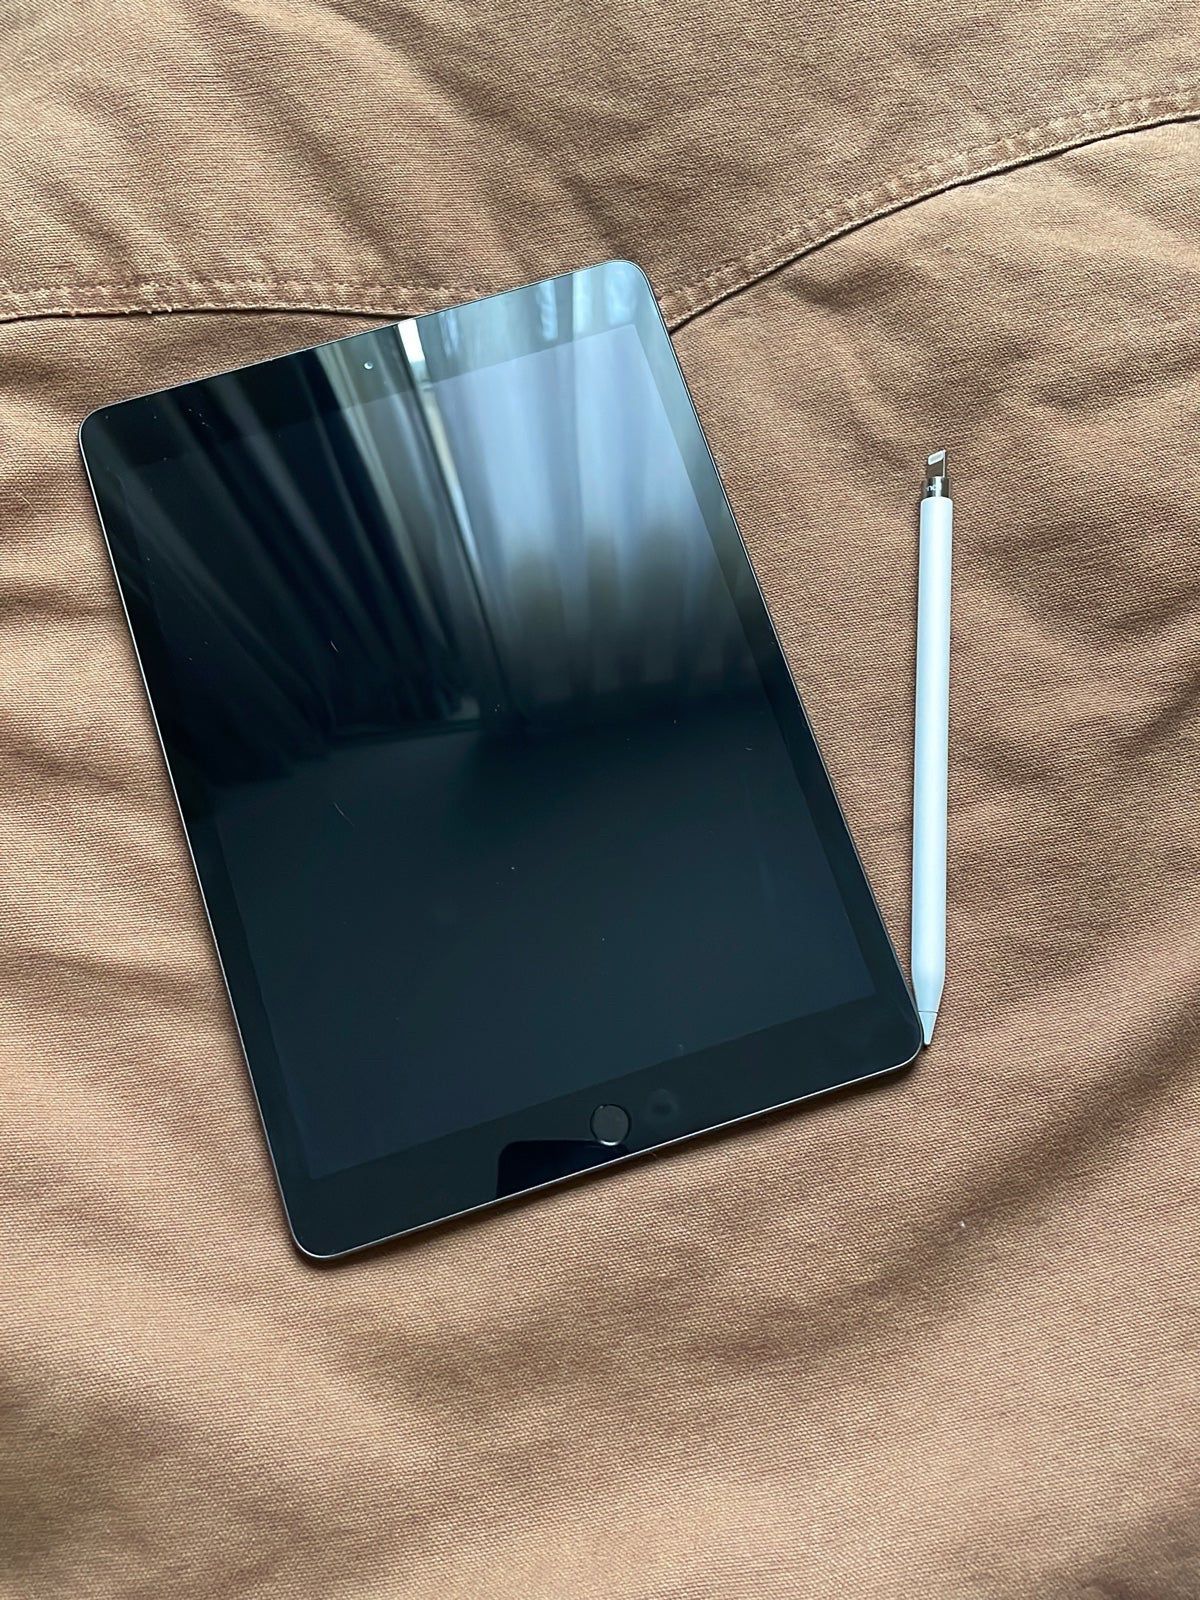 iPad with Apple Pencil 7th Gen for Sale in Tulsa, OK - OfferUp